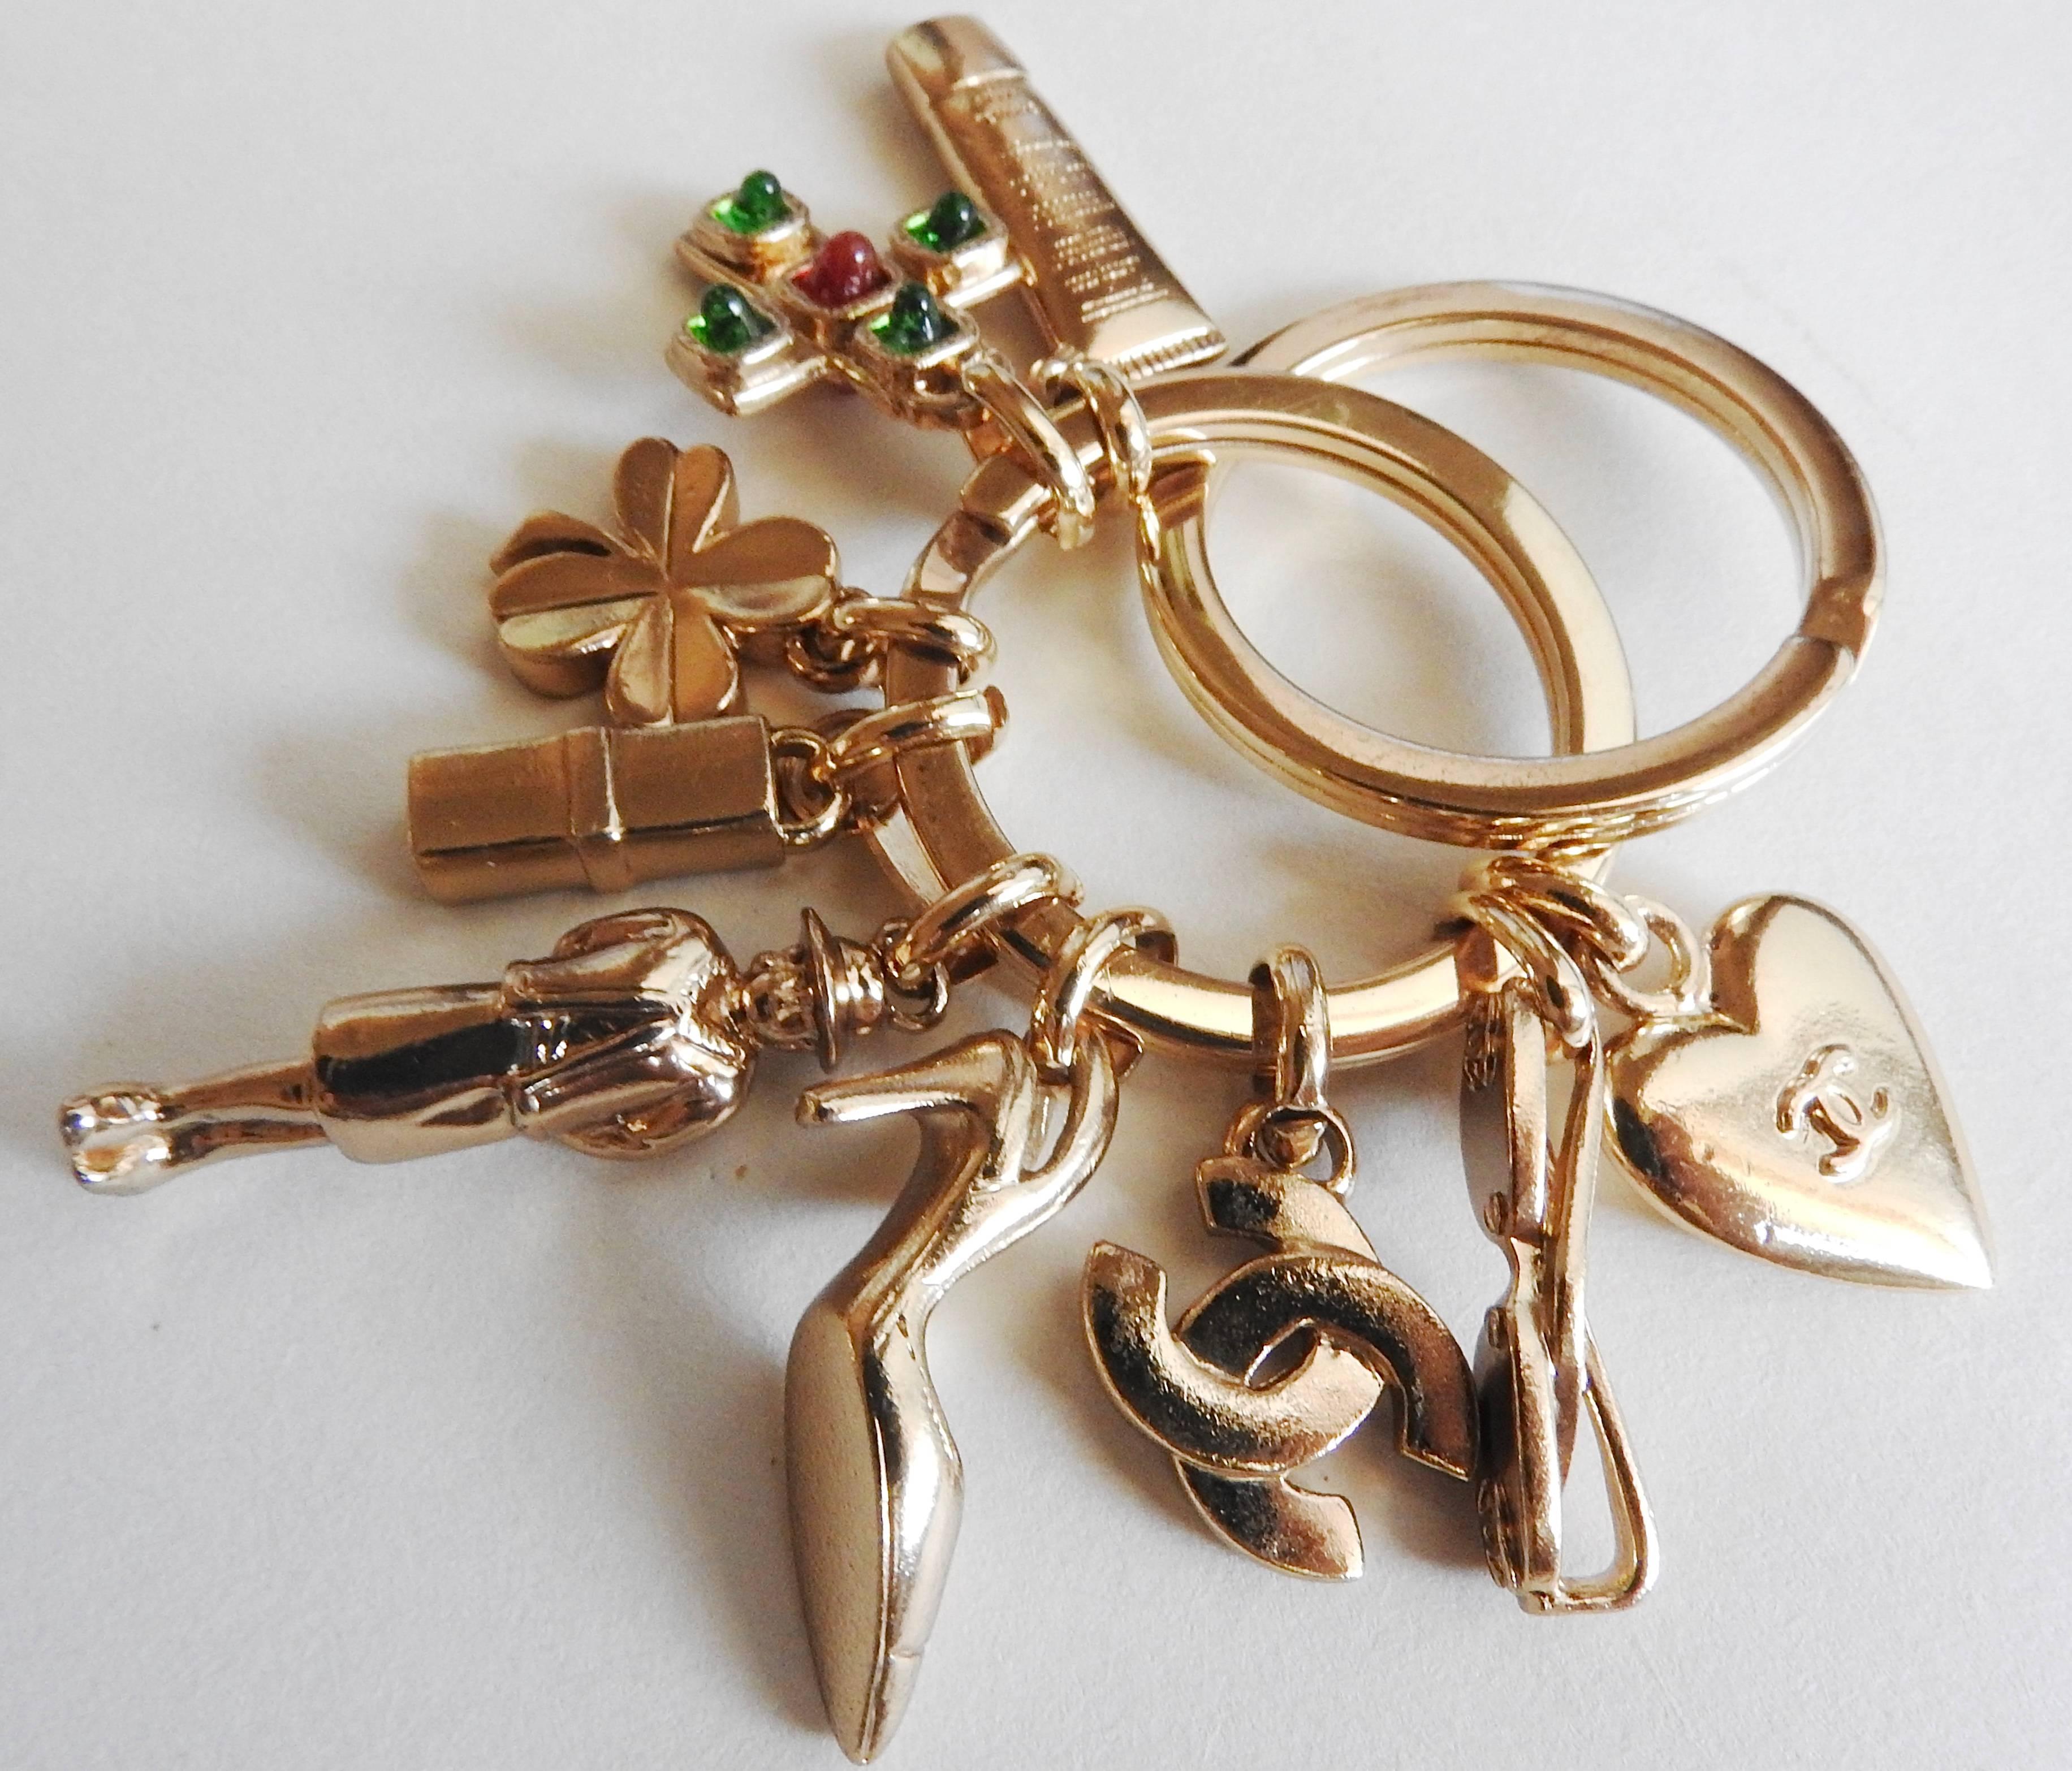 Chanel Charm Key Ring - For Sale on 1stDibs